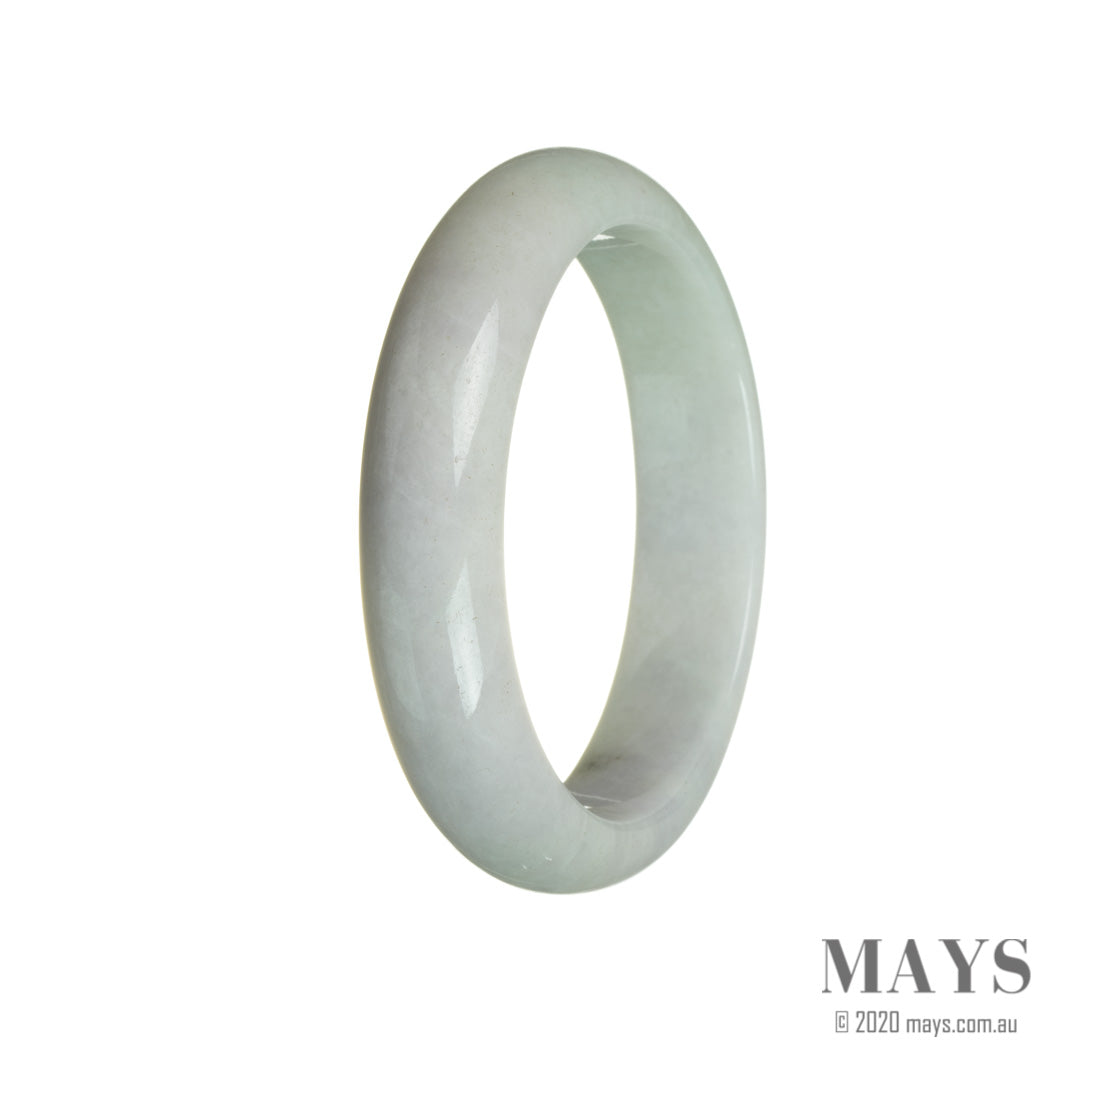 A lavendar and pale green jade bangle with a half moon design, made from high quality materials.